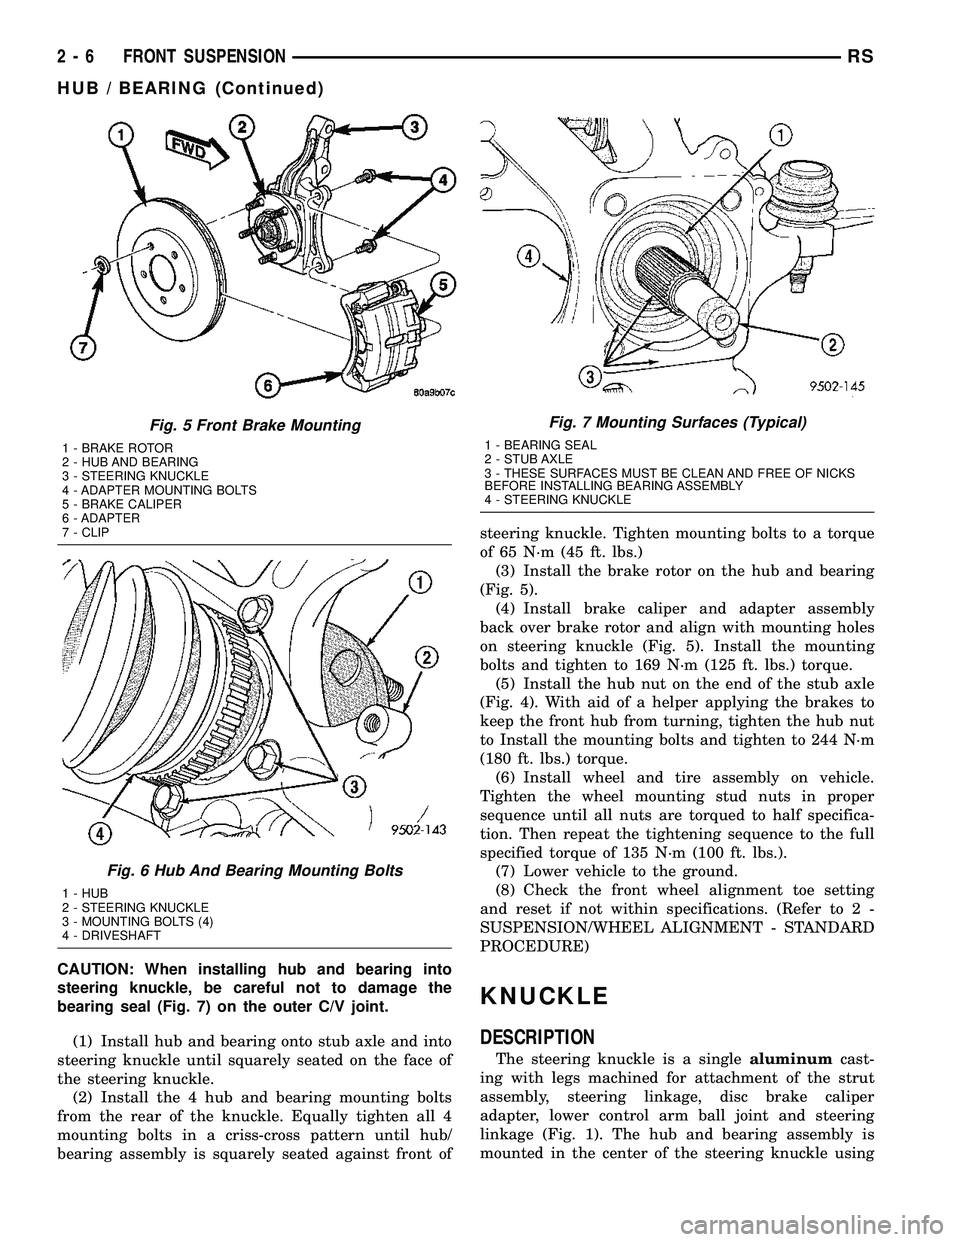 CHRYSLER CARAVAN 2005 Workshop Manual CAUTION: When installing hub and bearing into
steering knuckle, be careful not to damage the
bearing seal (Fig. 7) on the outer C/V joint.
(1) Install hub and bearing onto stub axle and into
steering 